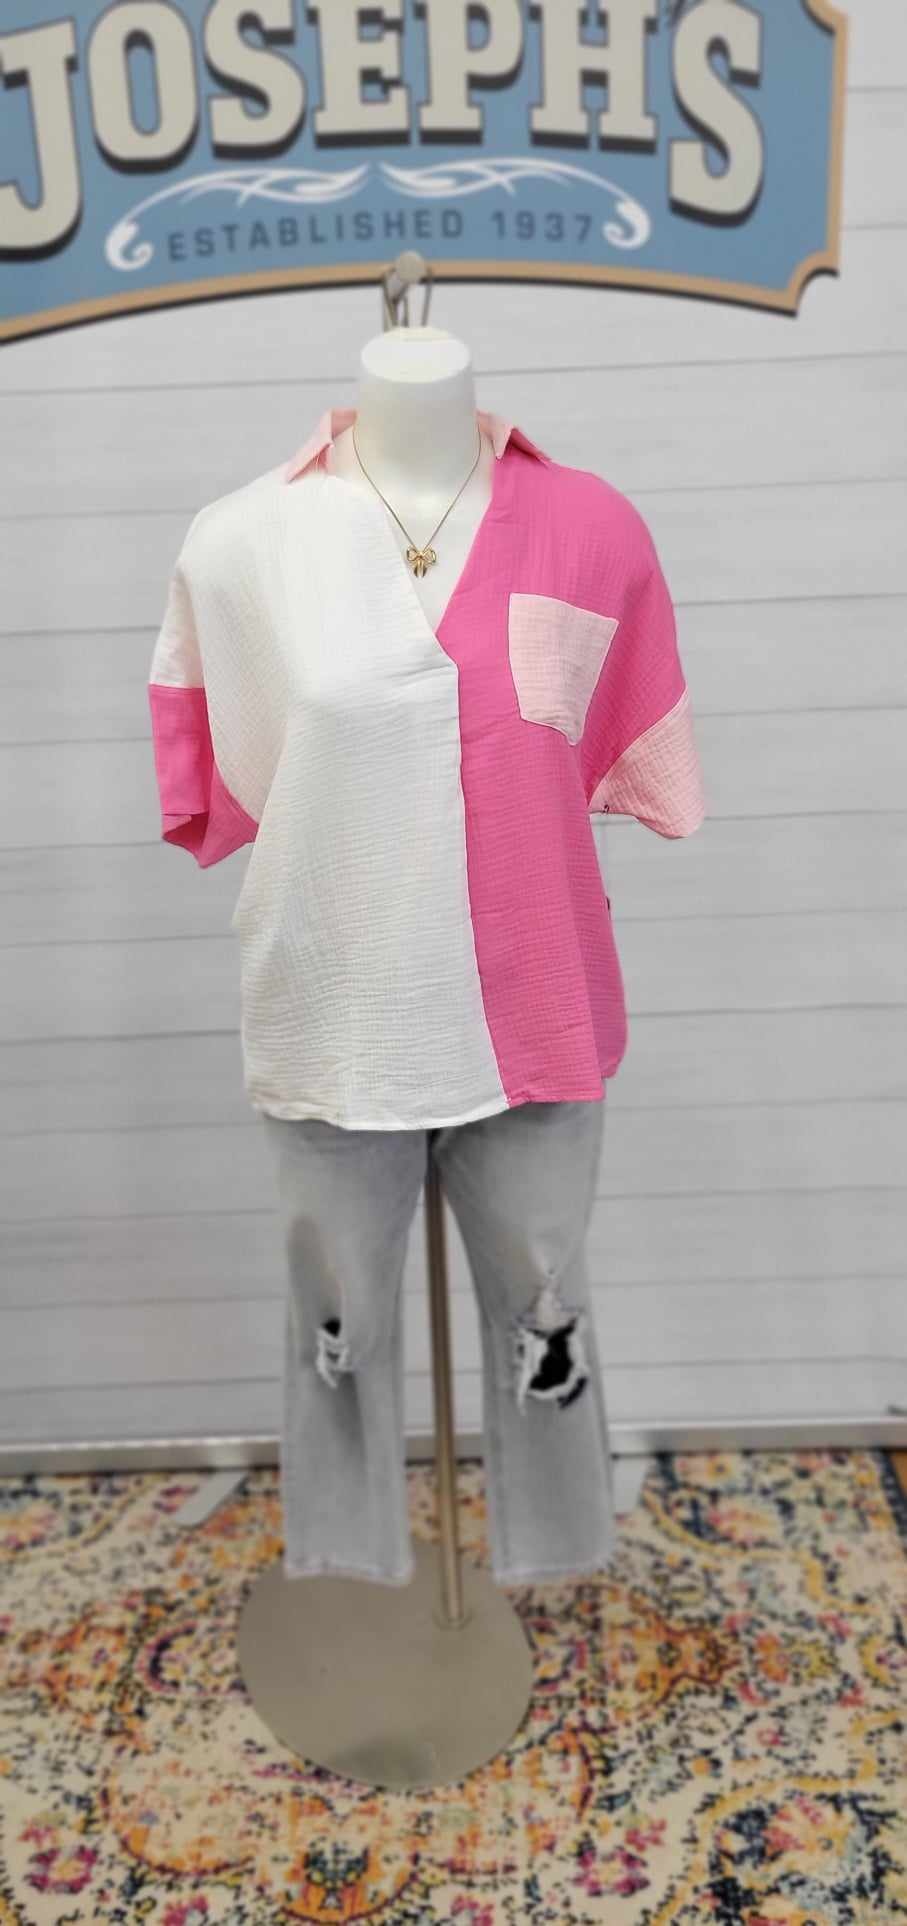 Thomas and Co. Pink/White Colorblock Top